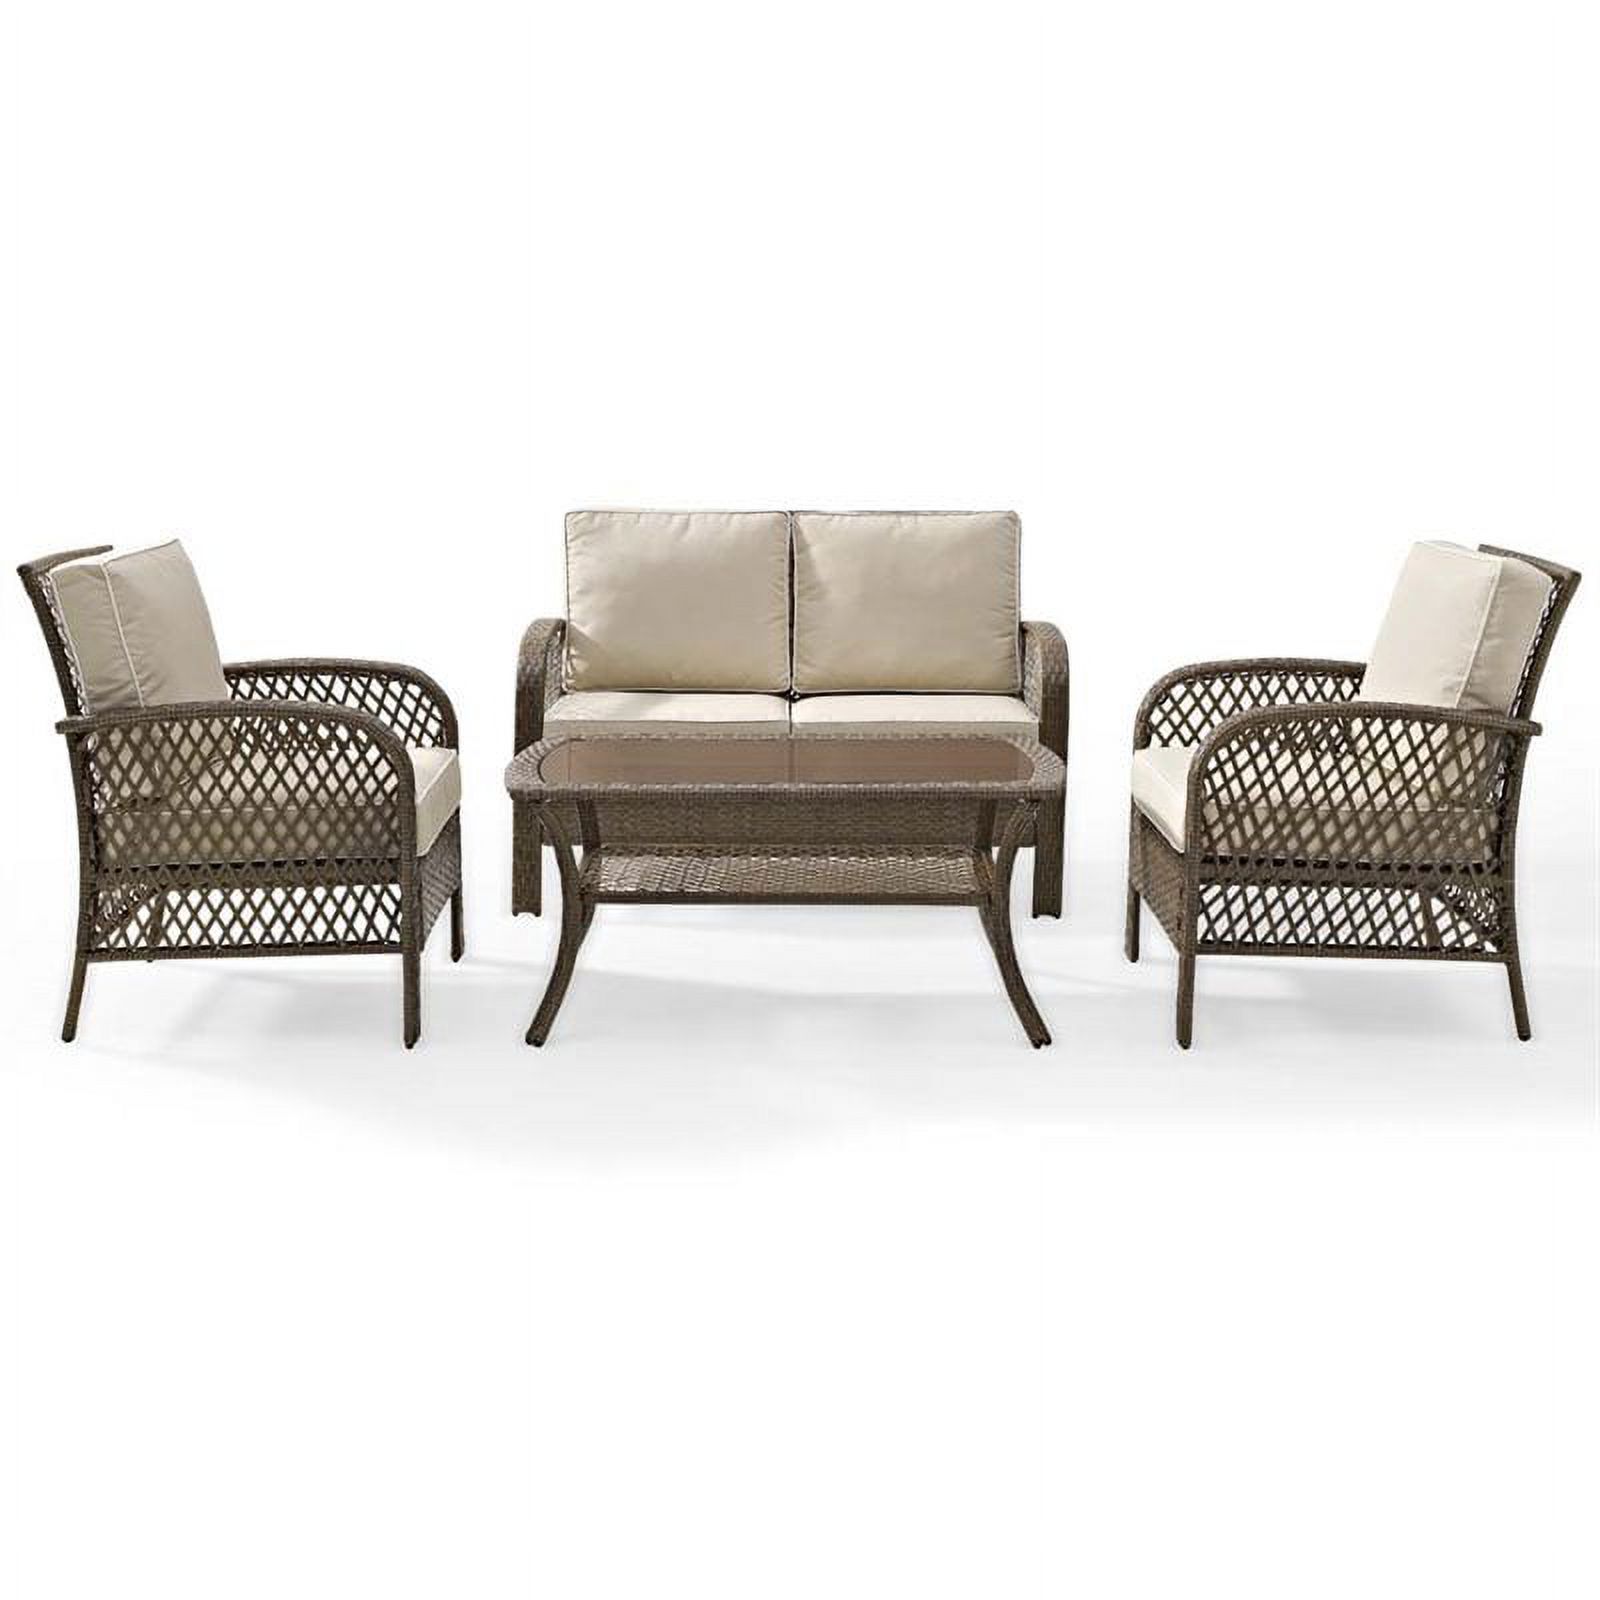 Crosley Furniture Tribeca 4 Piece Outdoor Wicker Seating Set With Sand Cushions - Loveseat, 2 Arm Chairs, And Coffee Table - image 2 of 7